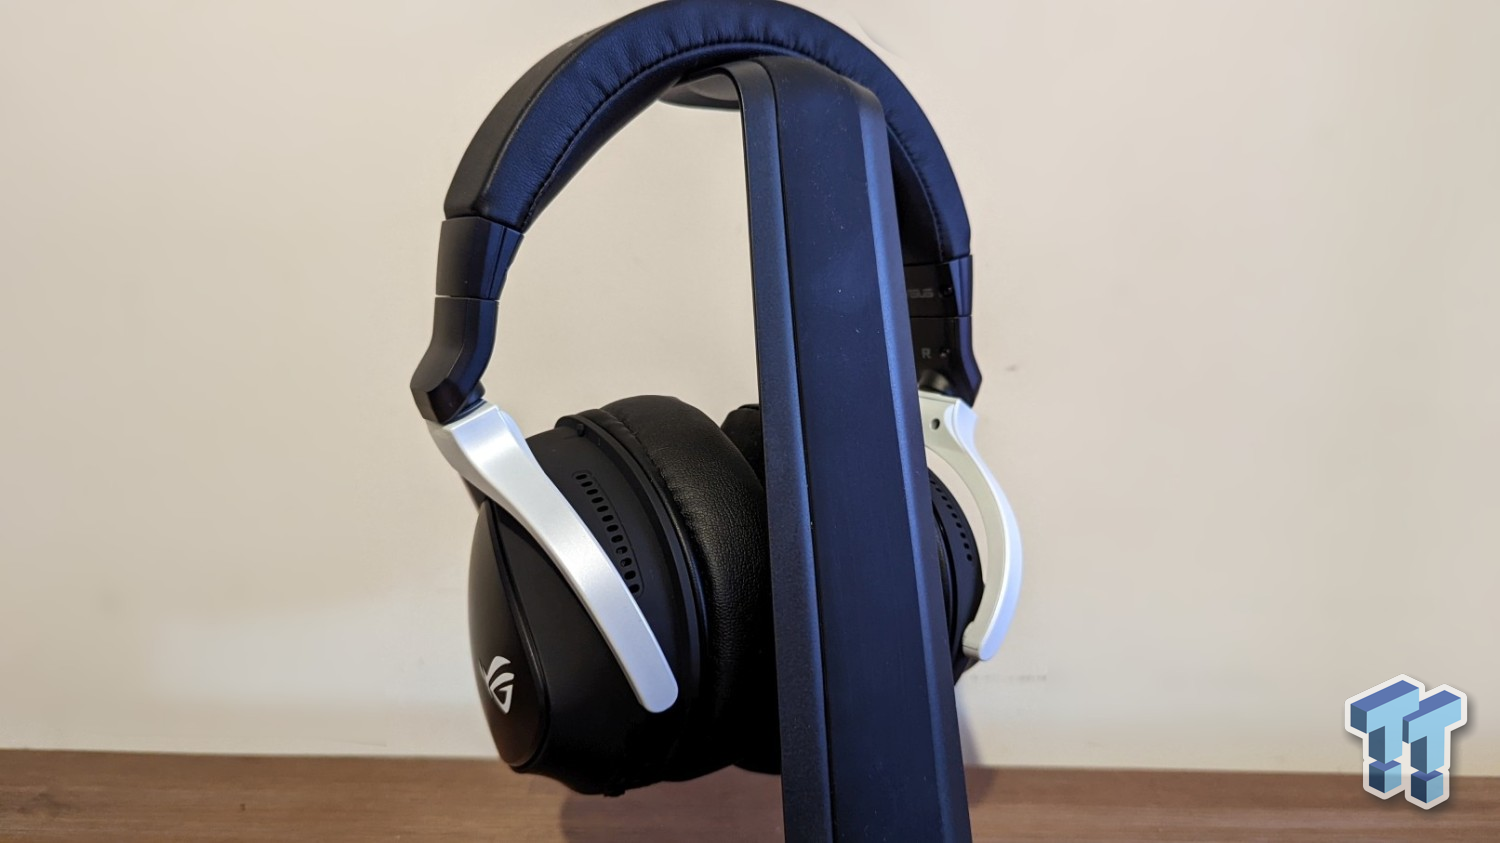 Asus ROG Delta S Wireless review: Test of the gaming headset